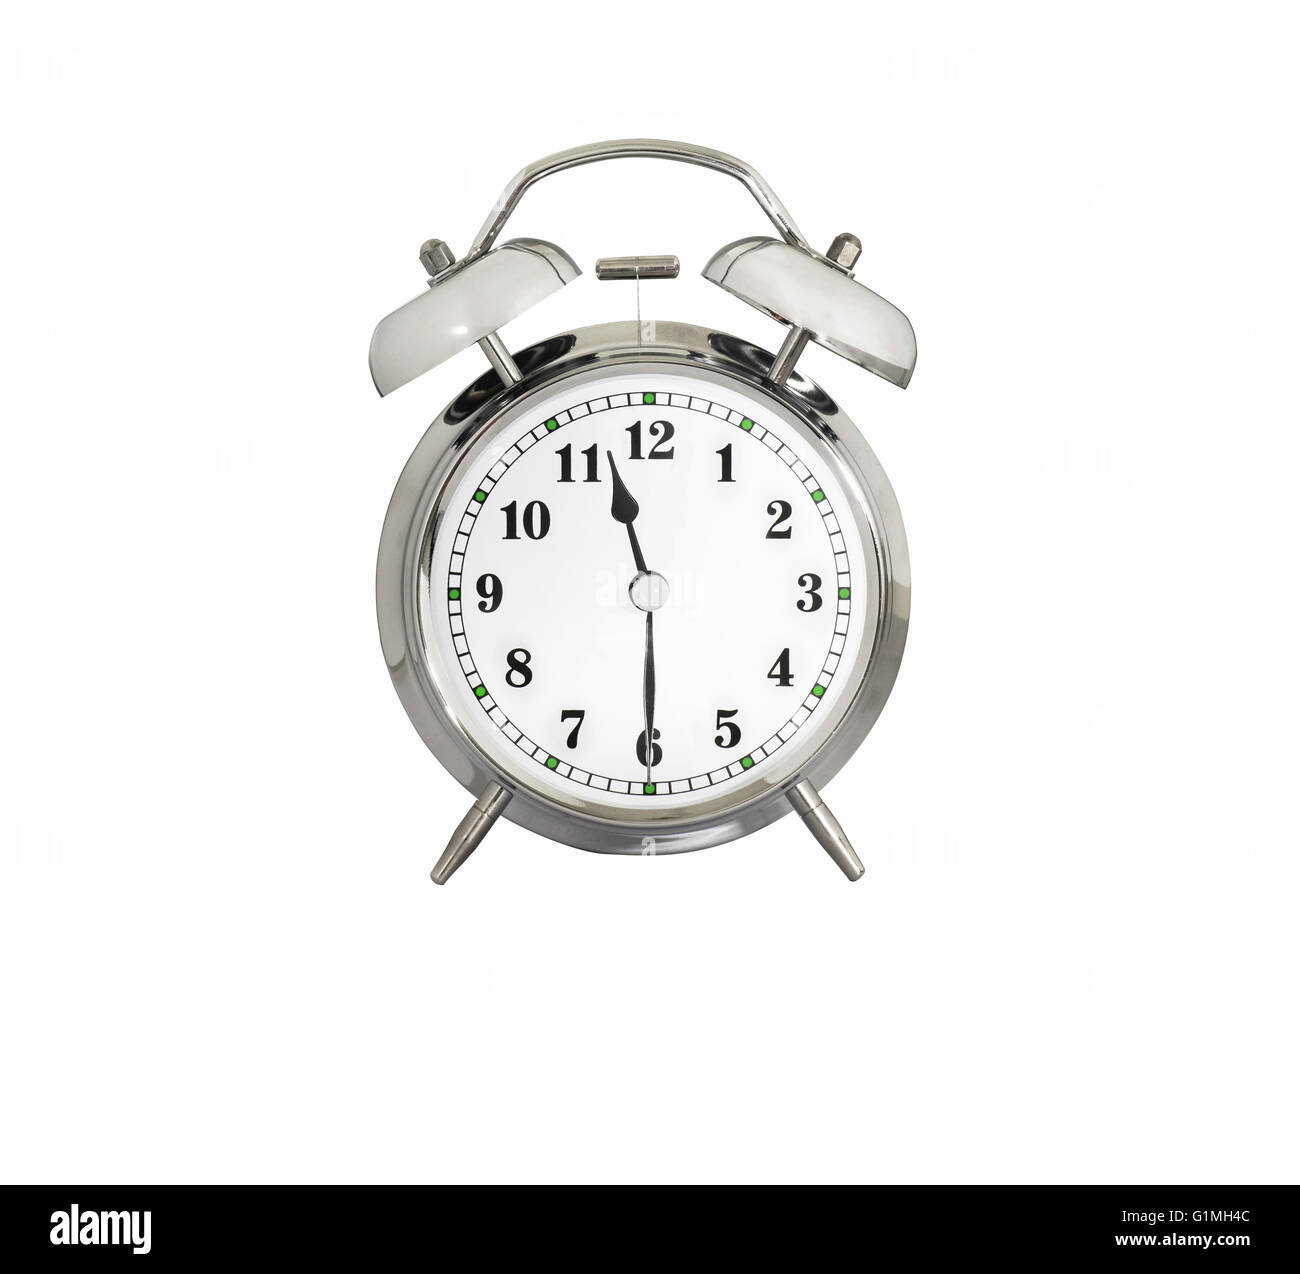 Traditional Alarm Clock Showing 11:30 Stock Photo